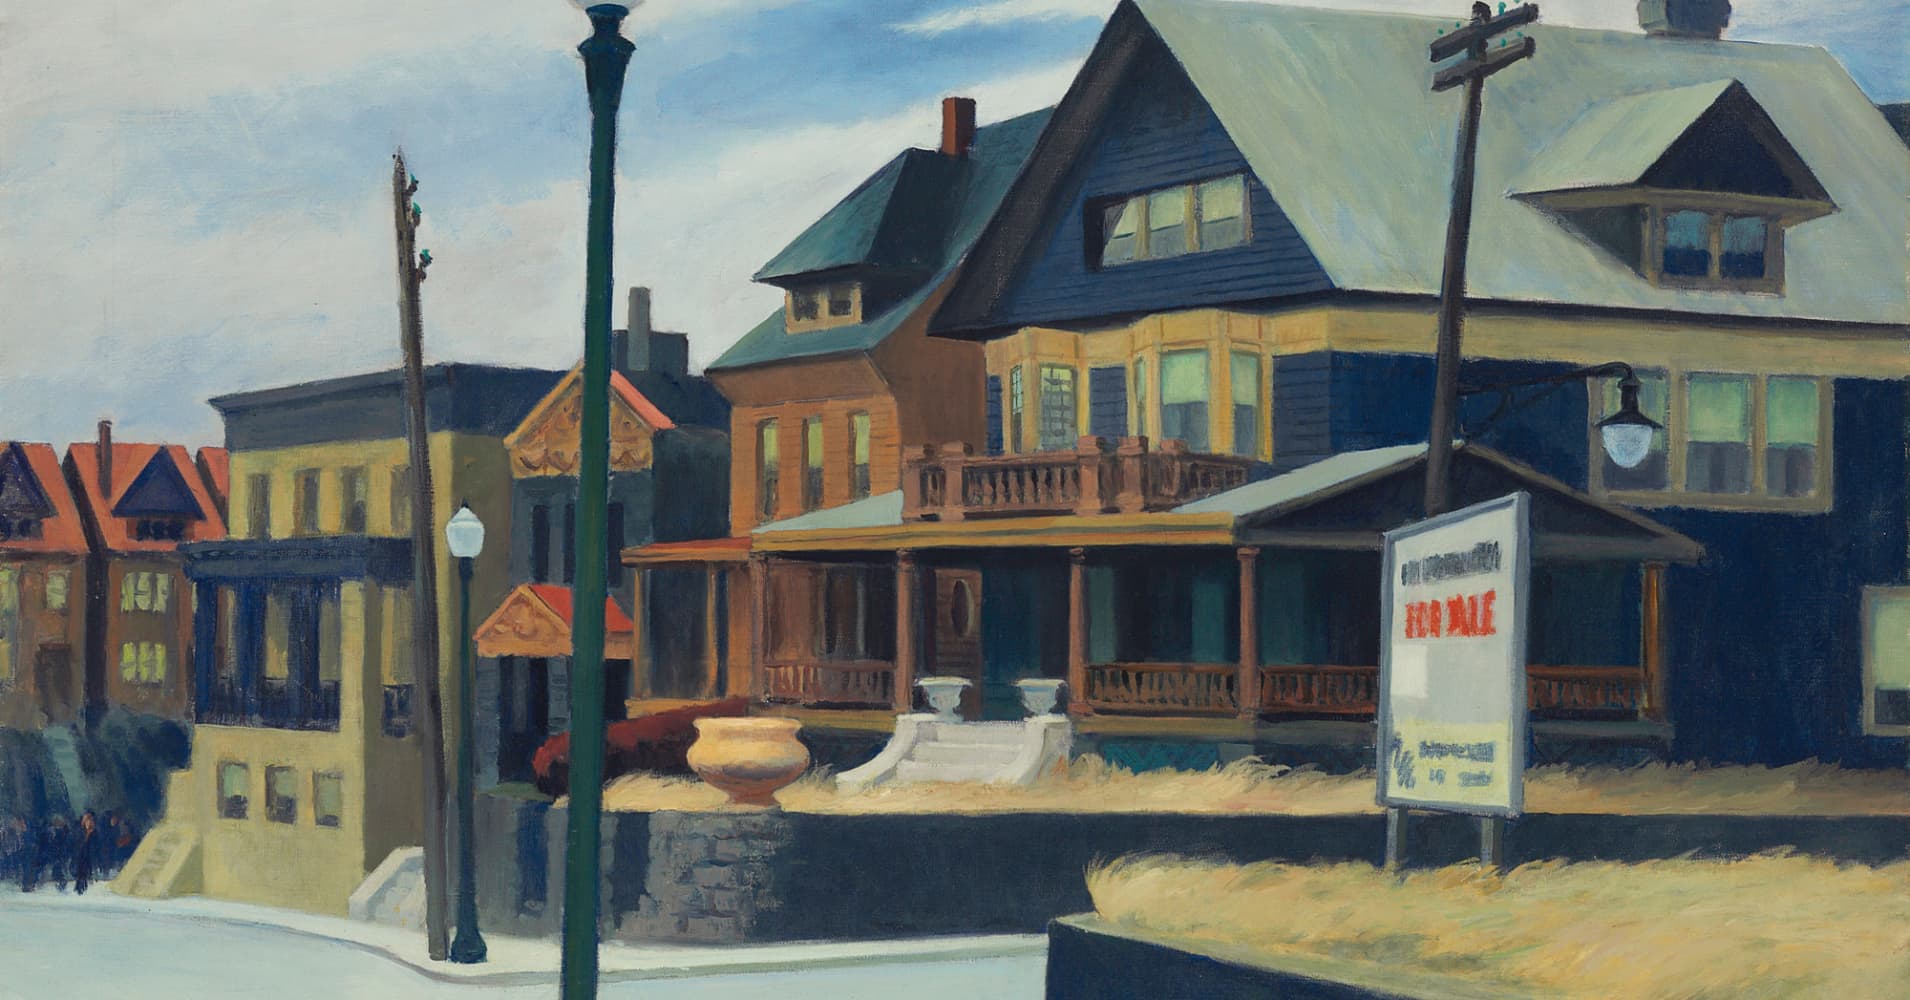 Edward Hopper painting sets new record with $40.5 million sale